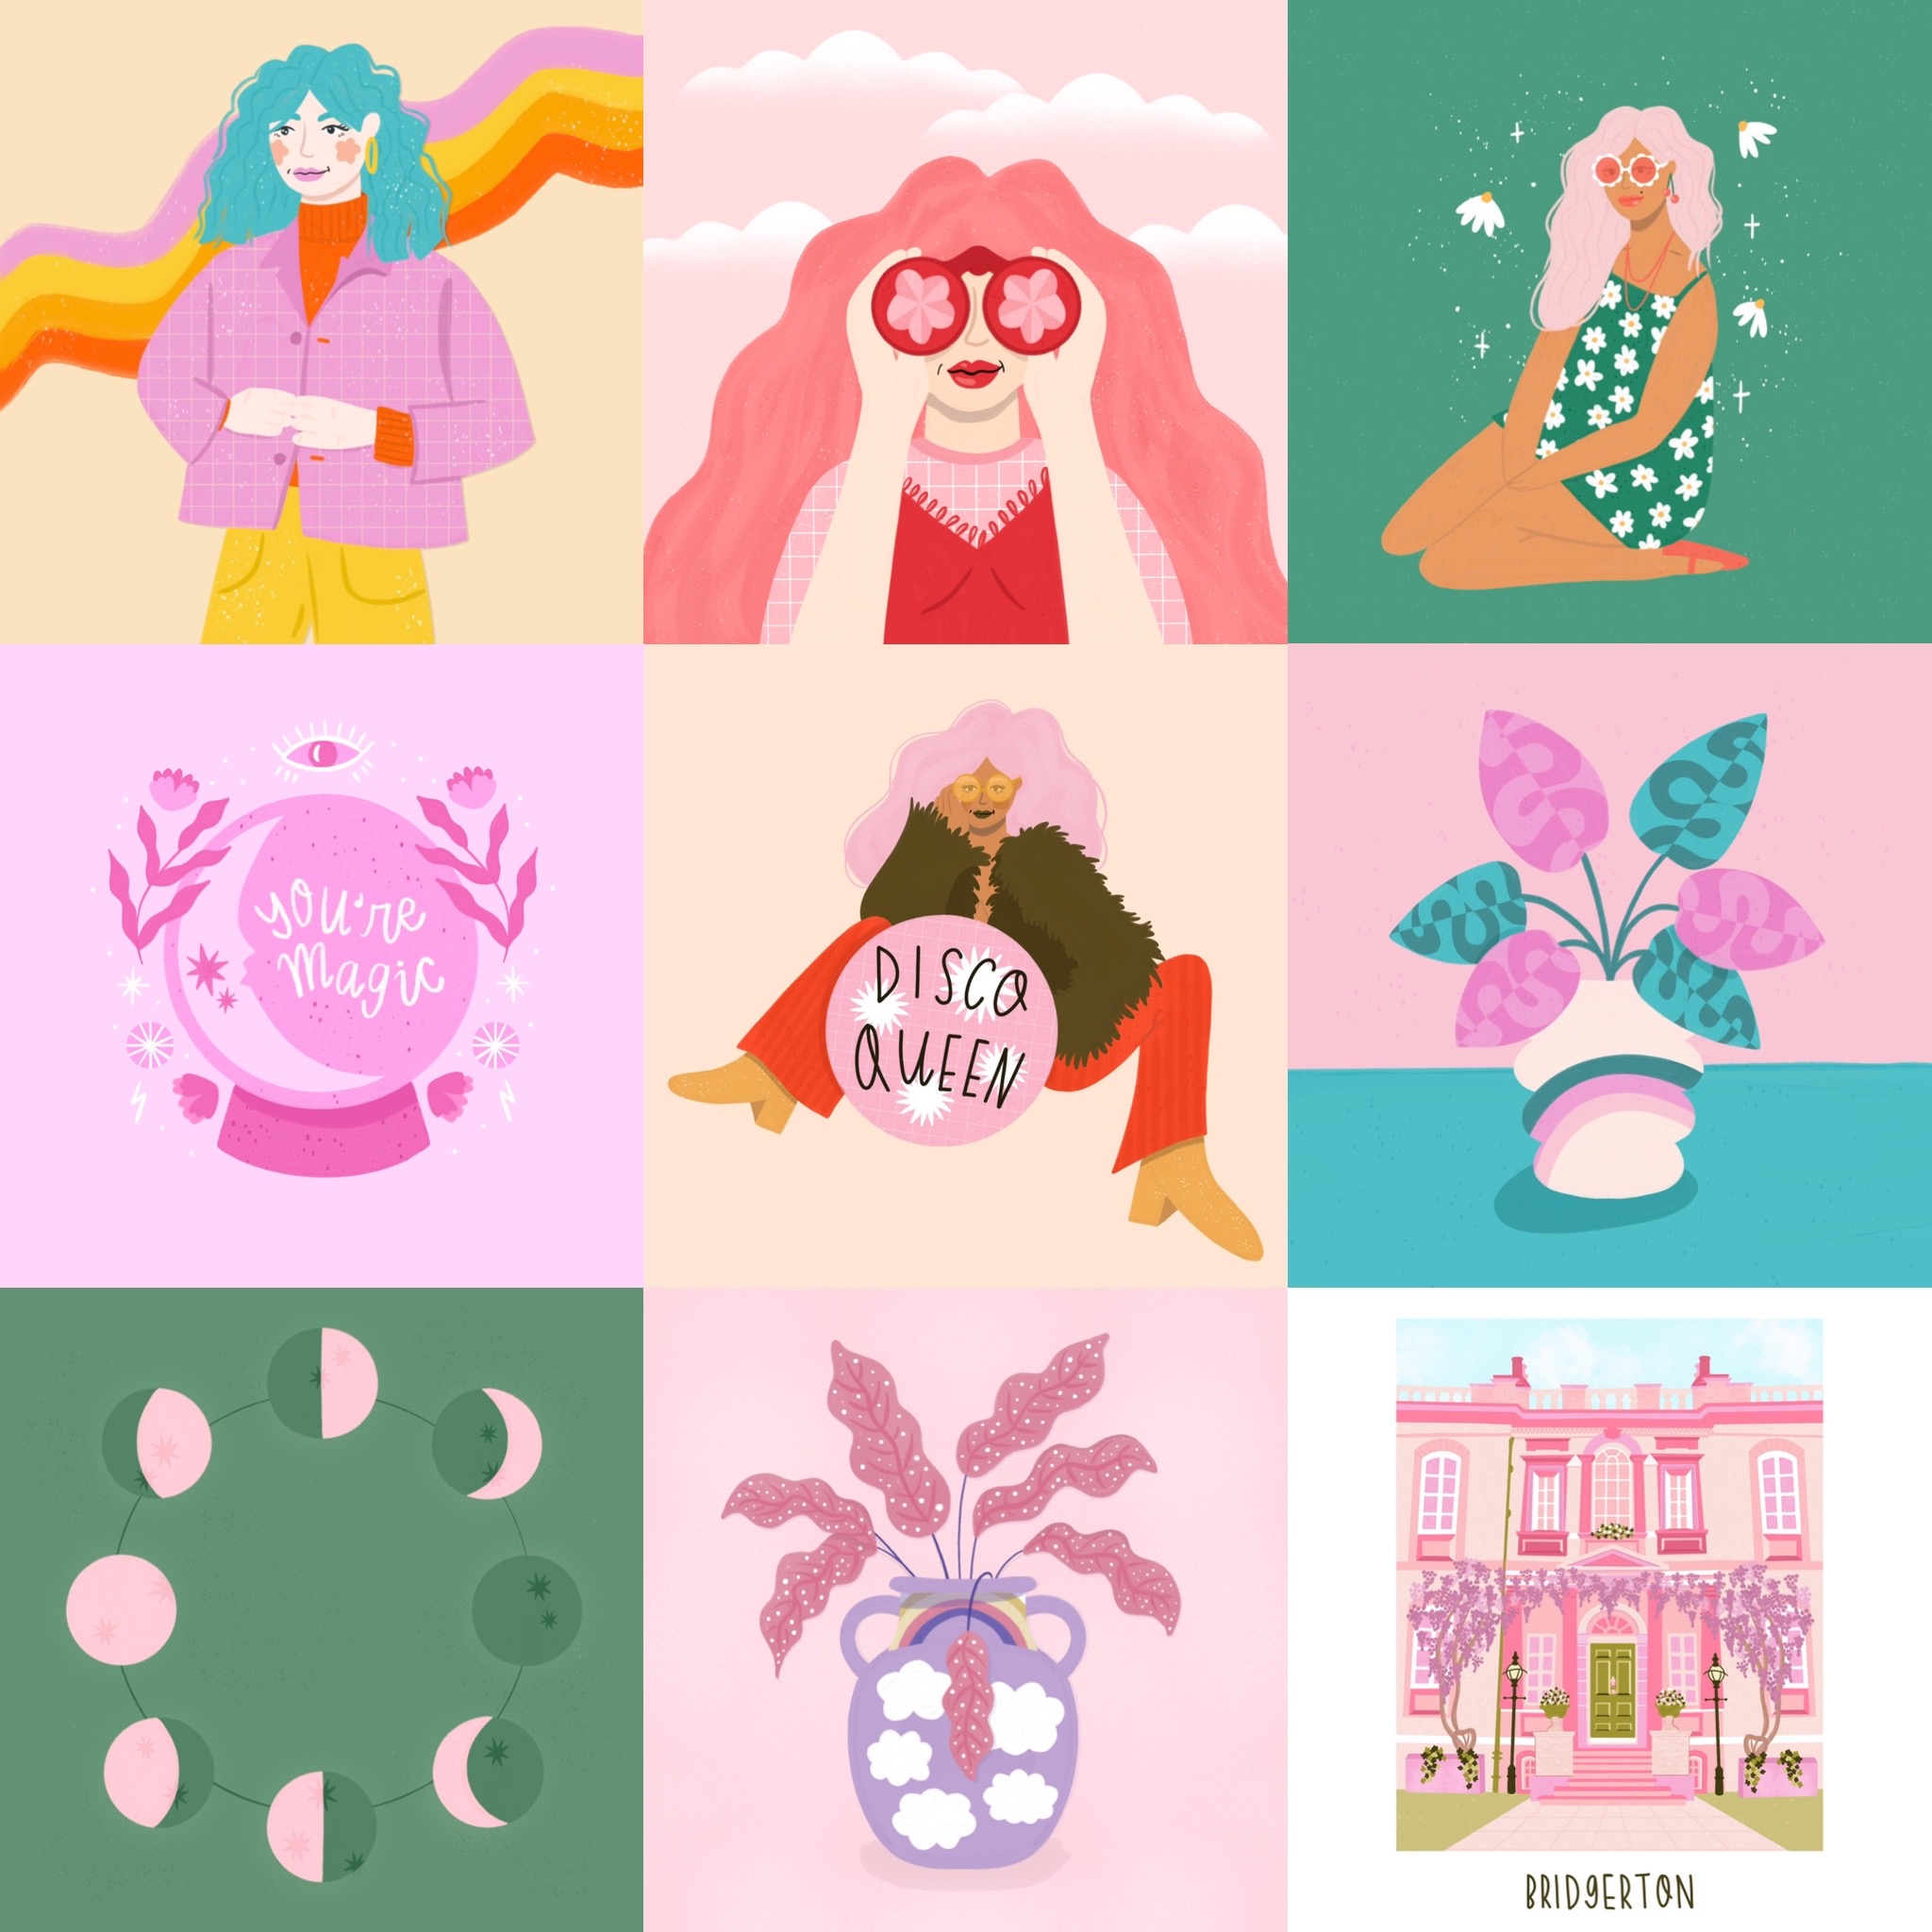 A collage of nine different illustrations. The top three present young women with colourful hair and clothing. The centre image also presents a colourful young woman, this time with a disco ball with the text: 'DISCO QUEEN'. On her left there is a pink image with the text 'you're magic' and on her right there’s an image of a pink and blue plant in a vase. The bottom left image could be an upright necklace consisting of eight beads with varying degrees of pink and green, on a green background. To the right (bottom-centre) is a pink plant in a purple vase which is patterned with white clouds and to the right of this (Bottom-right), there is an image of a pink mansion with a green door and underneath it, some text which reads 'BRIDGERTON'.